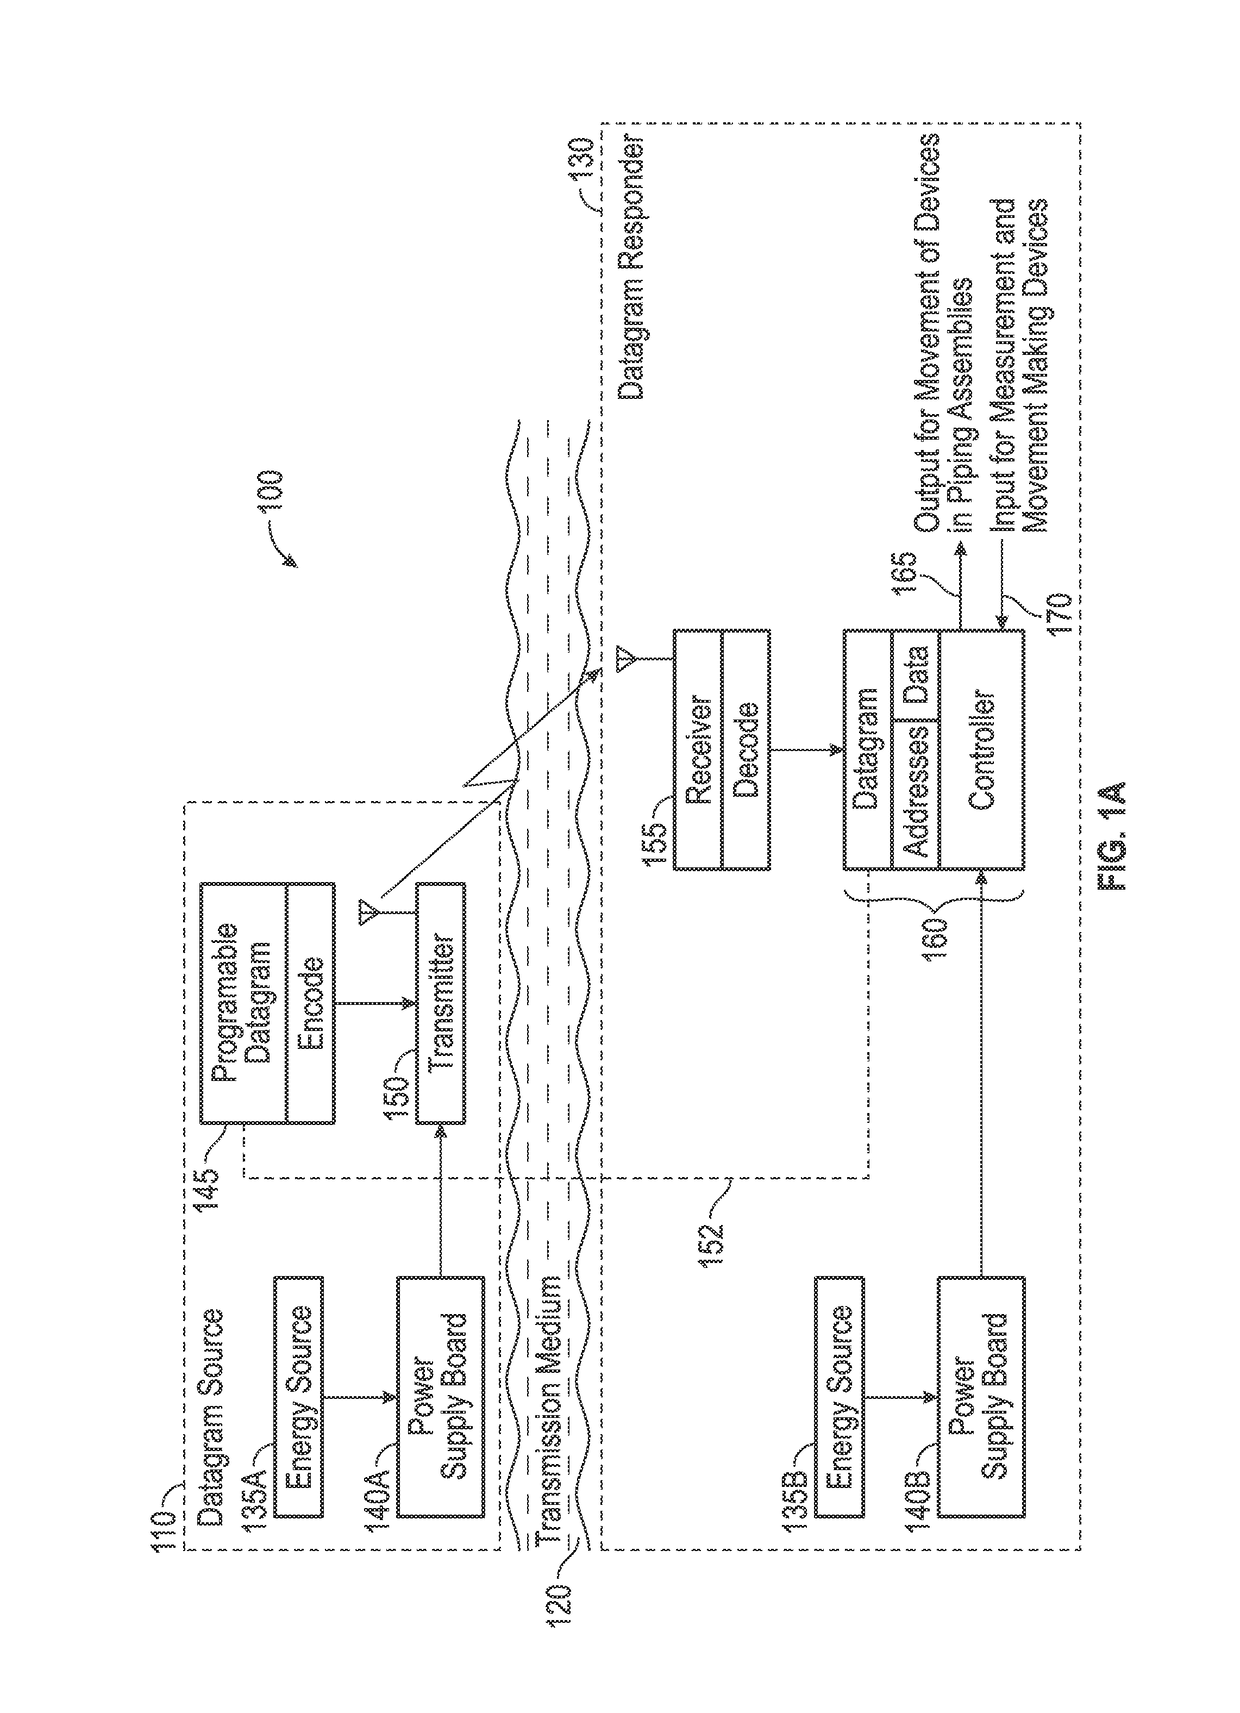 Piping assembly control system with addressed datagrams